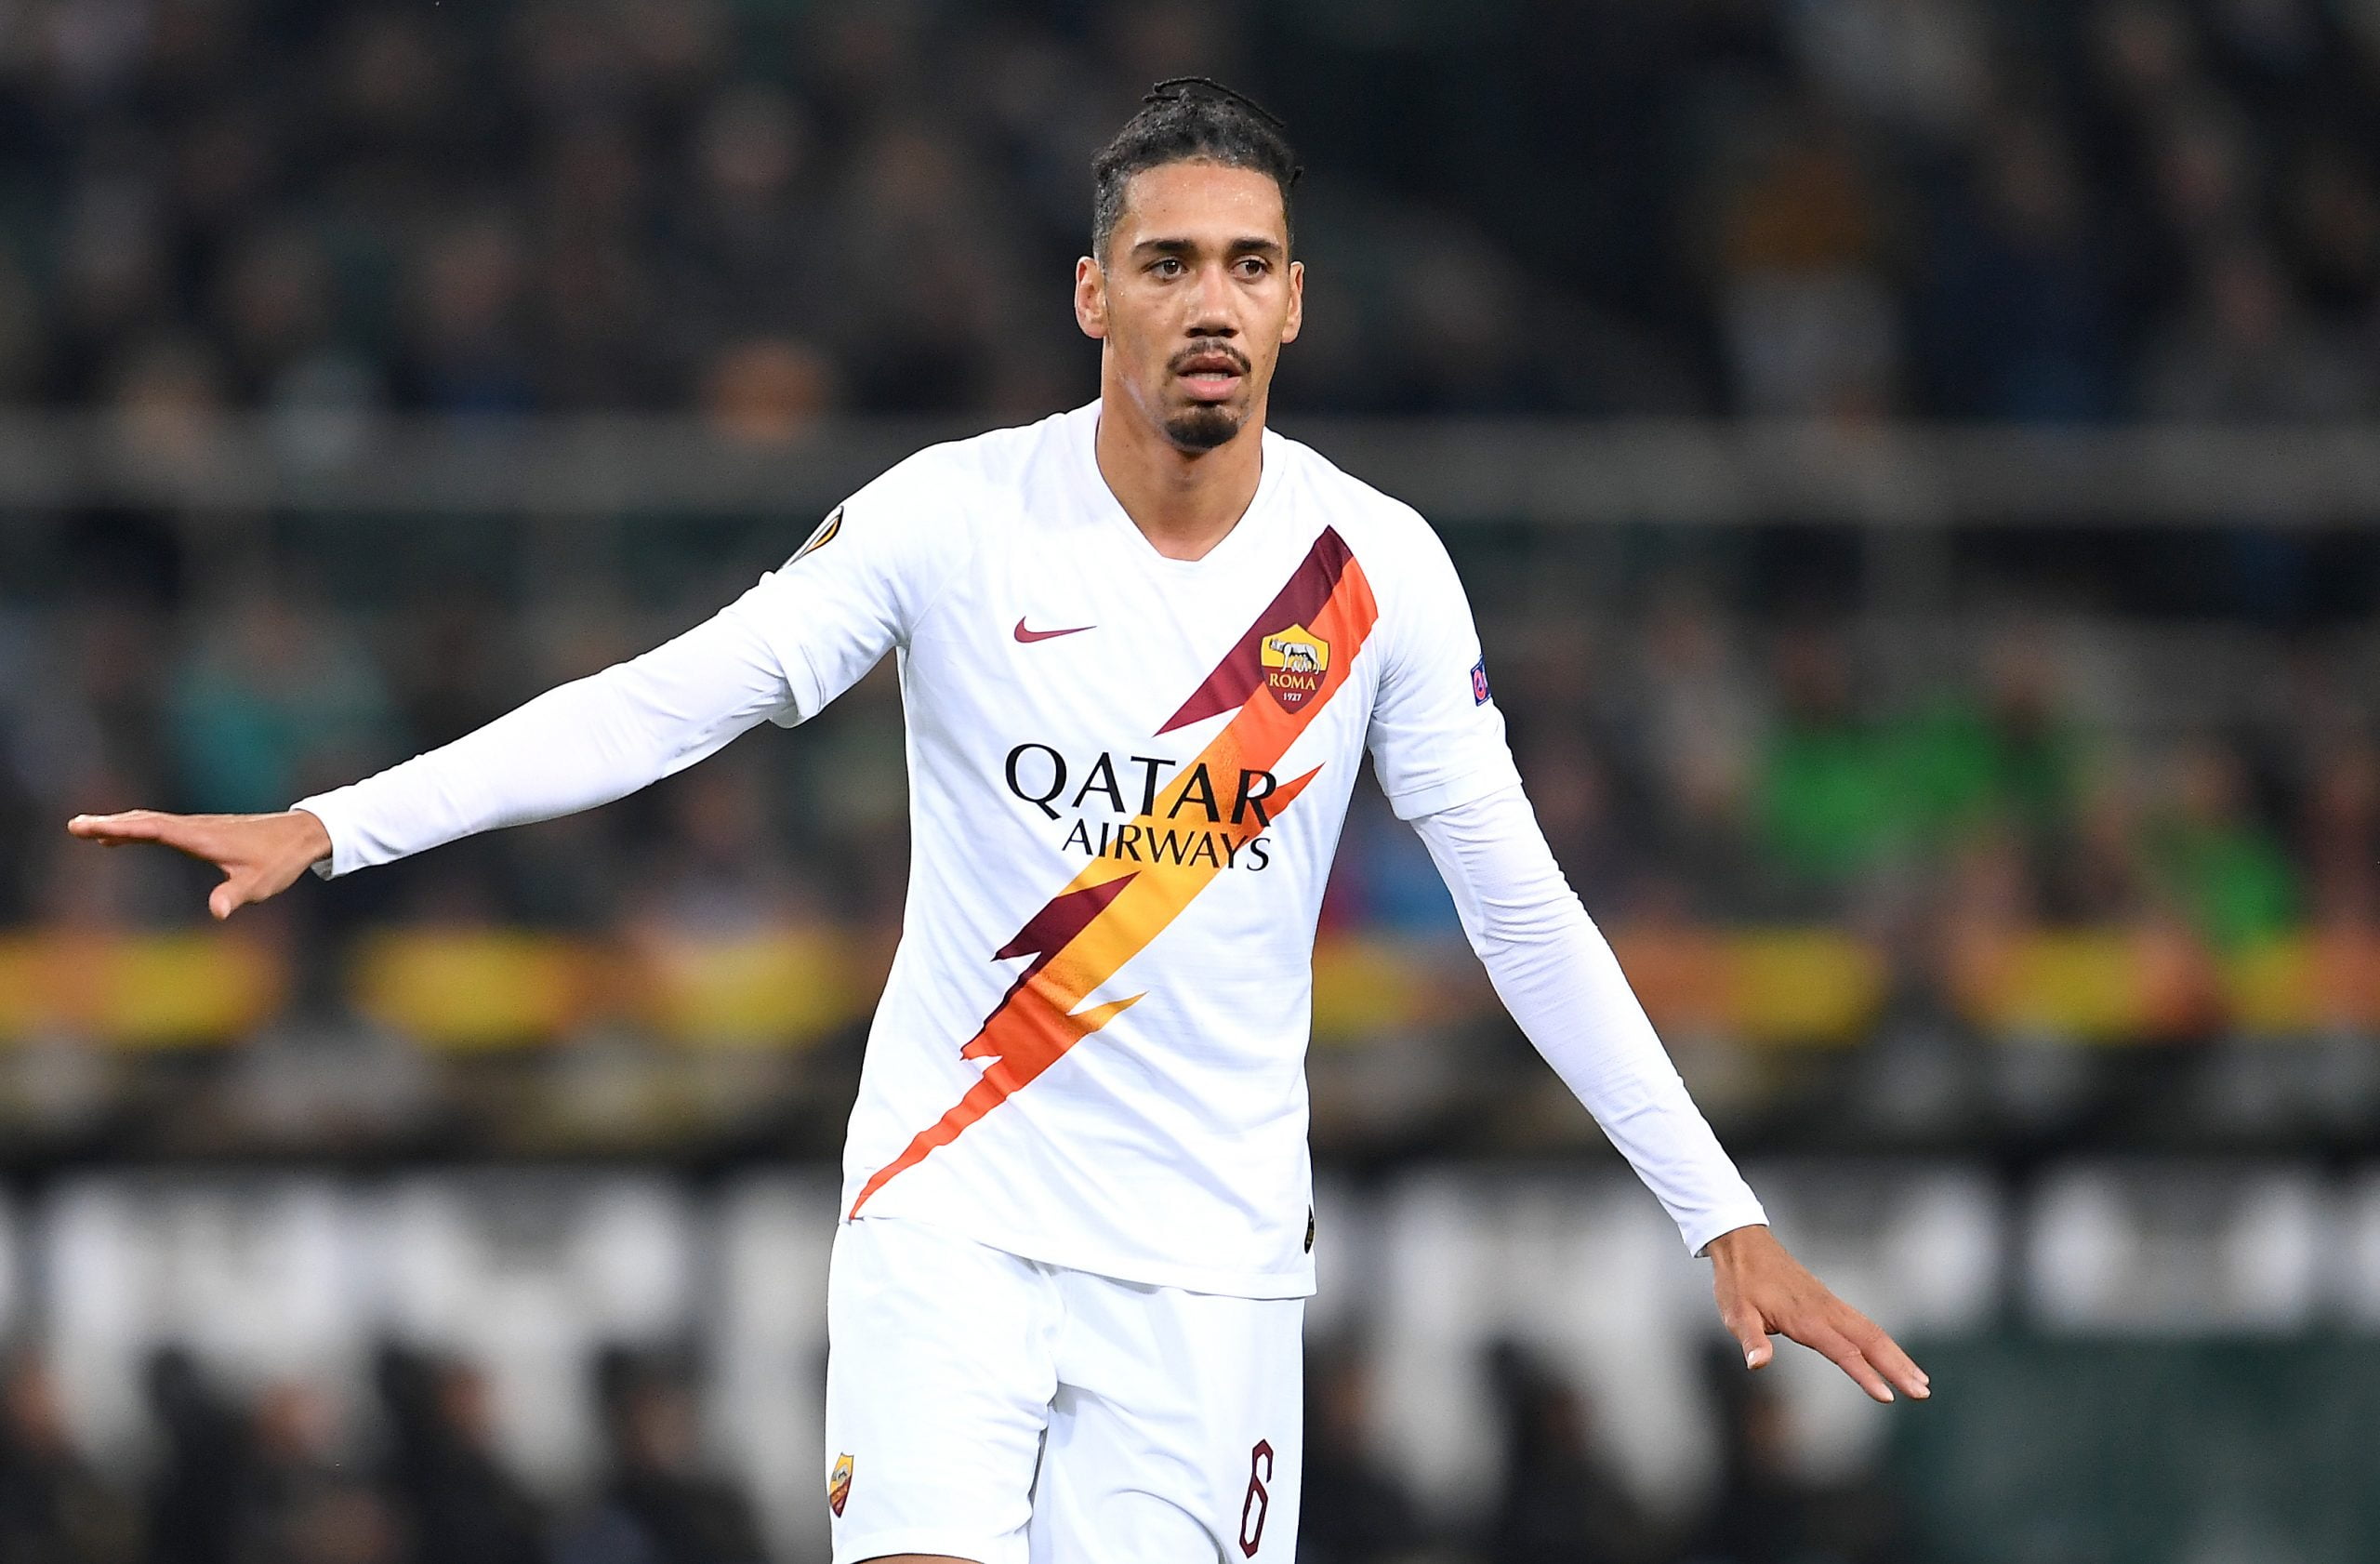 Chris Smalling of AS Roma reacts during the UEFA Europa League group J match between Borussia Moenchengladbach and AS Roma at Borussia-Park on November 07, 2019 in Moenchengladbach, Germany. (Photo by Jörg Schüler/Bongarts/Getty Images)